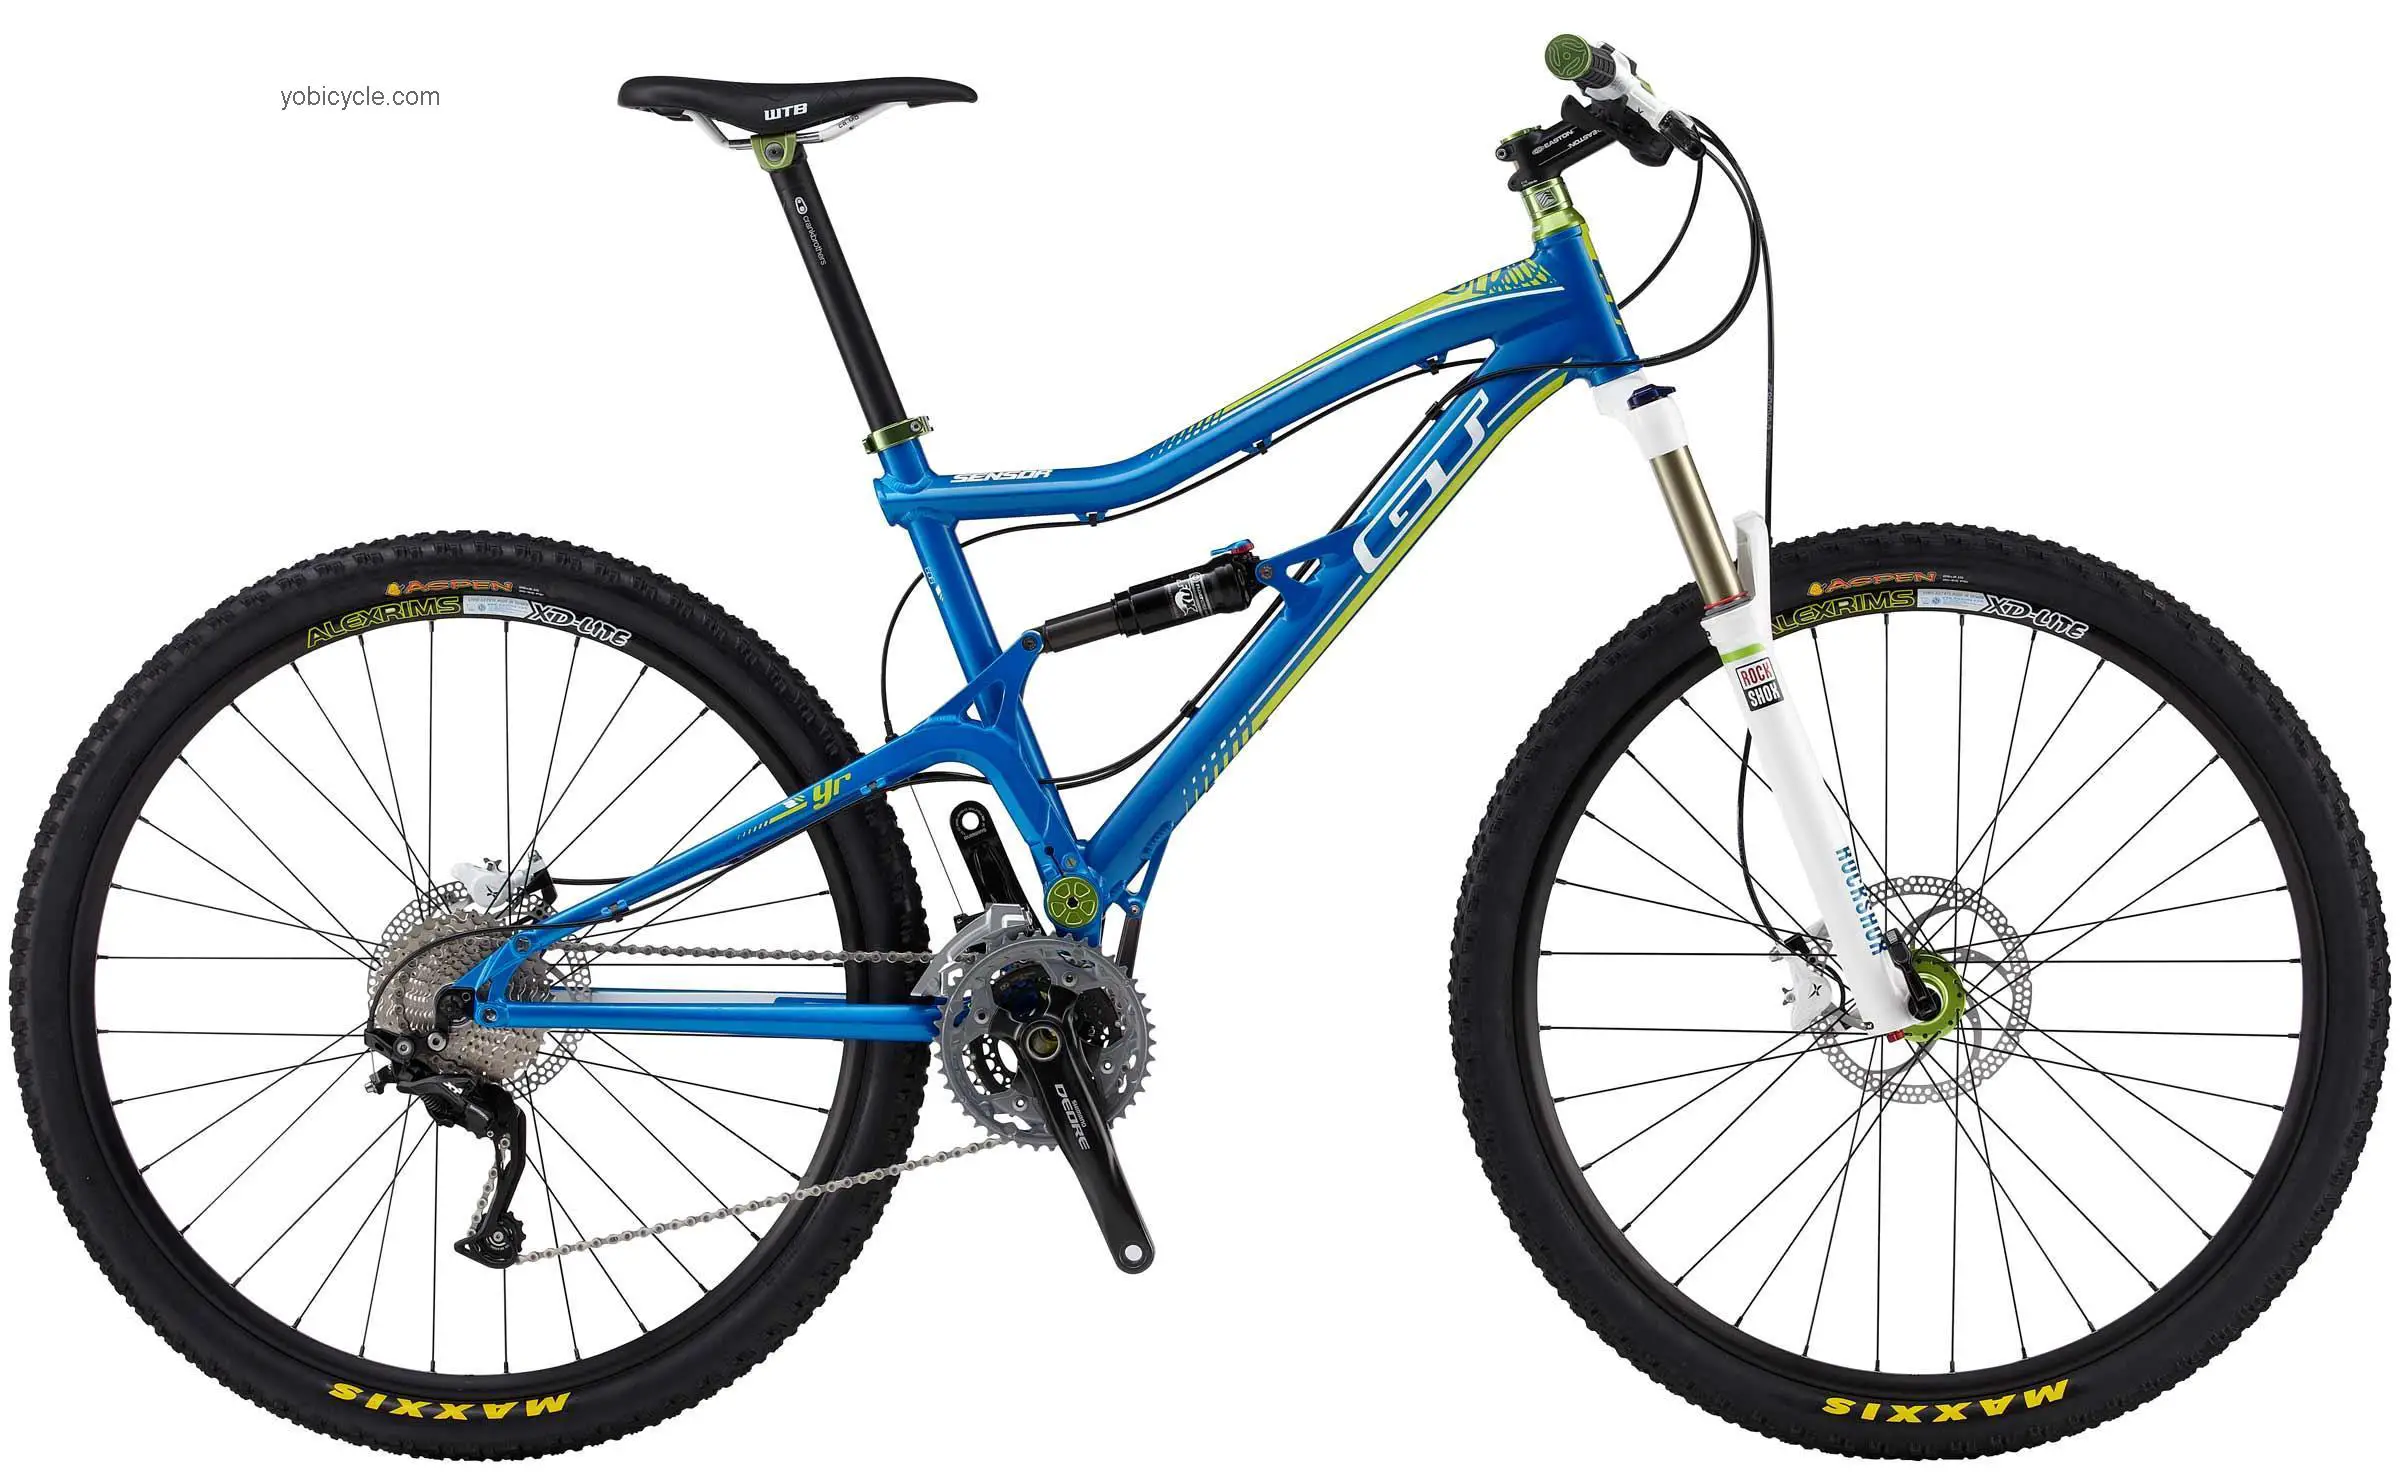 GT Bicycles Sensor 9R Expert 2013 comparison online with competitors